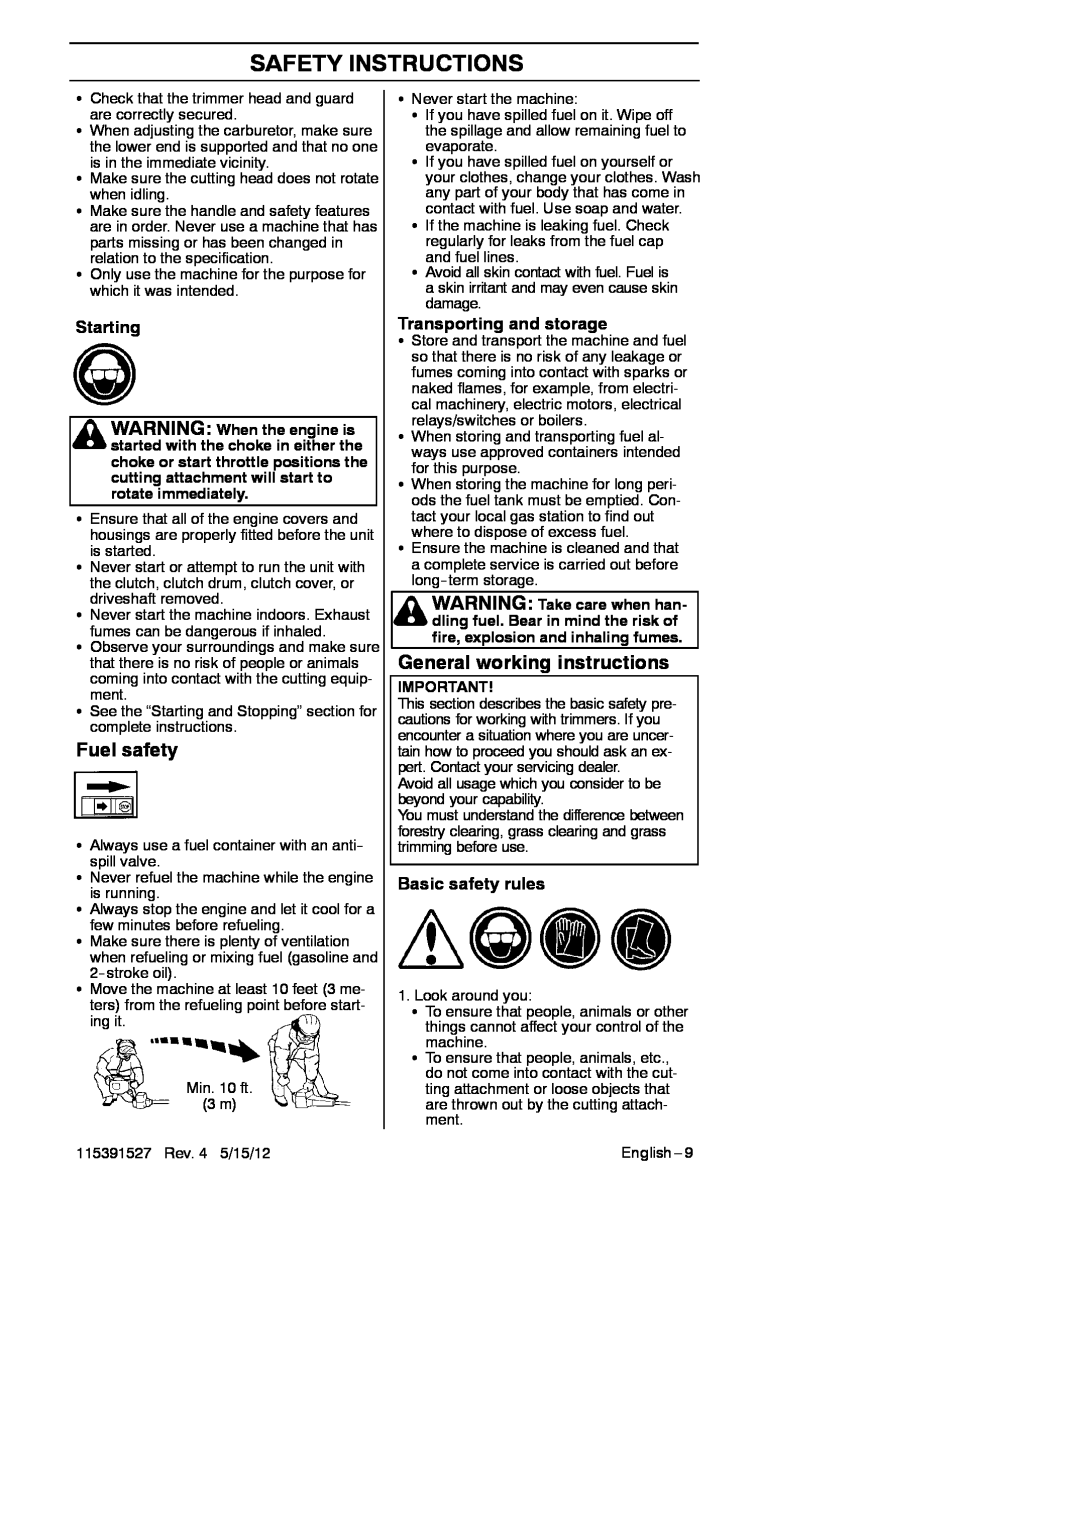 RedMax BC280 manual Fuel safety, General working instructions, Starting, Transporting and storage, Basic safety rules 